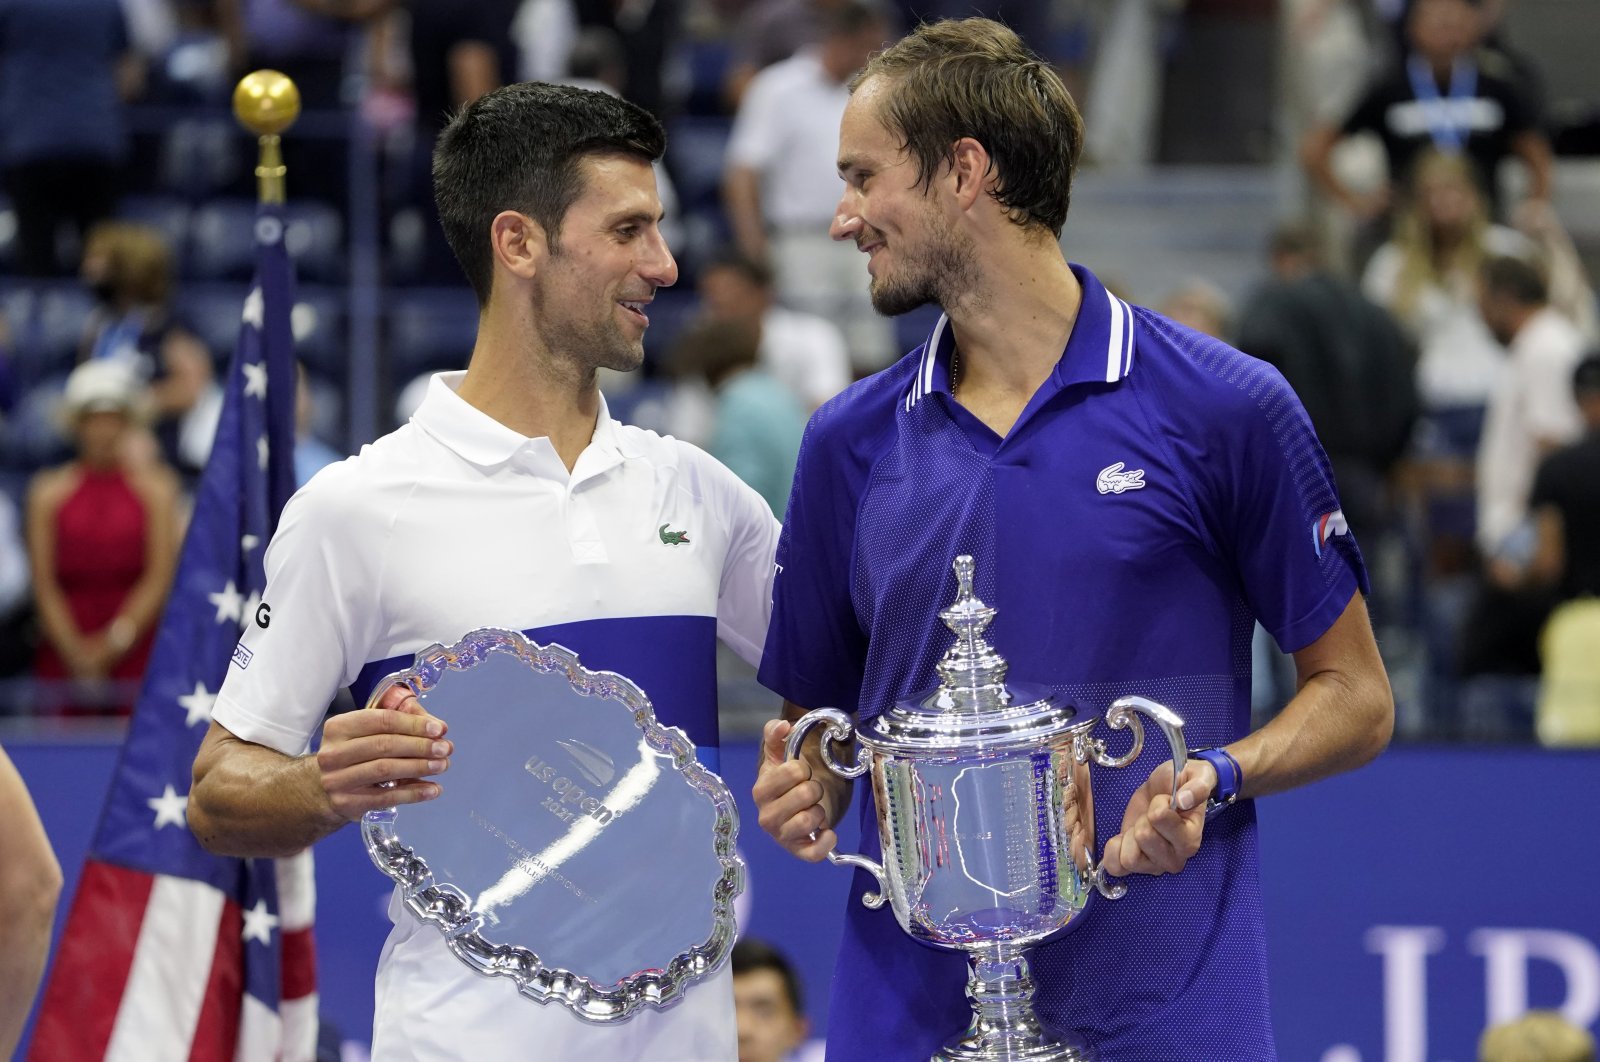 Serbia's Novak Djokovic (L) and Russia's Daniil Medvedev talk during the trophy ceremony after the U.S. Open men's singles final in New York, U.S., Sept. 12, 2021. (AP Photo)